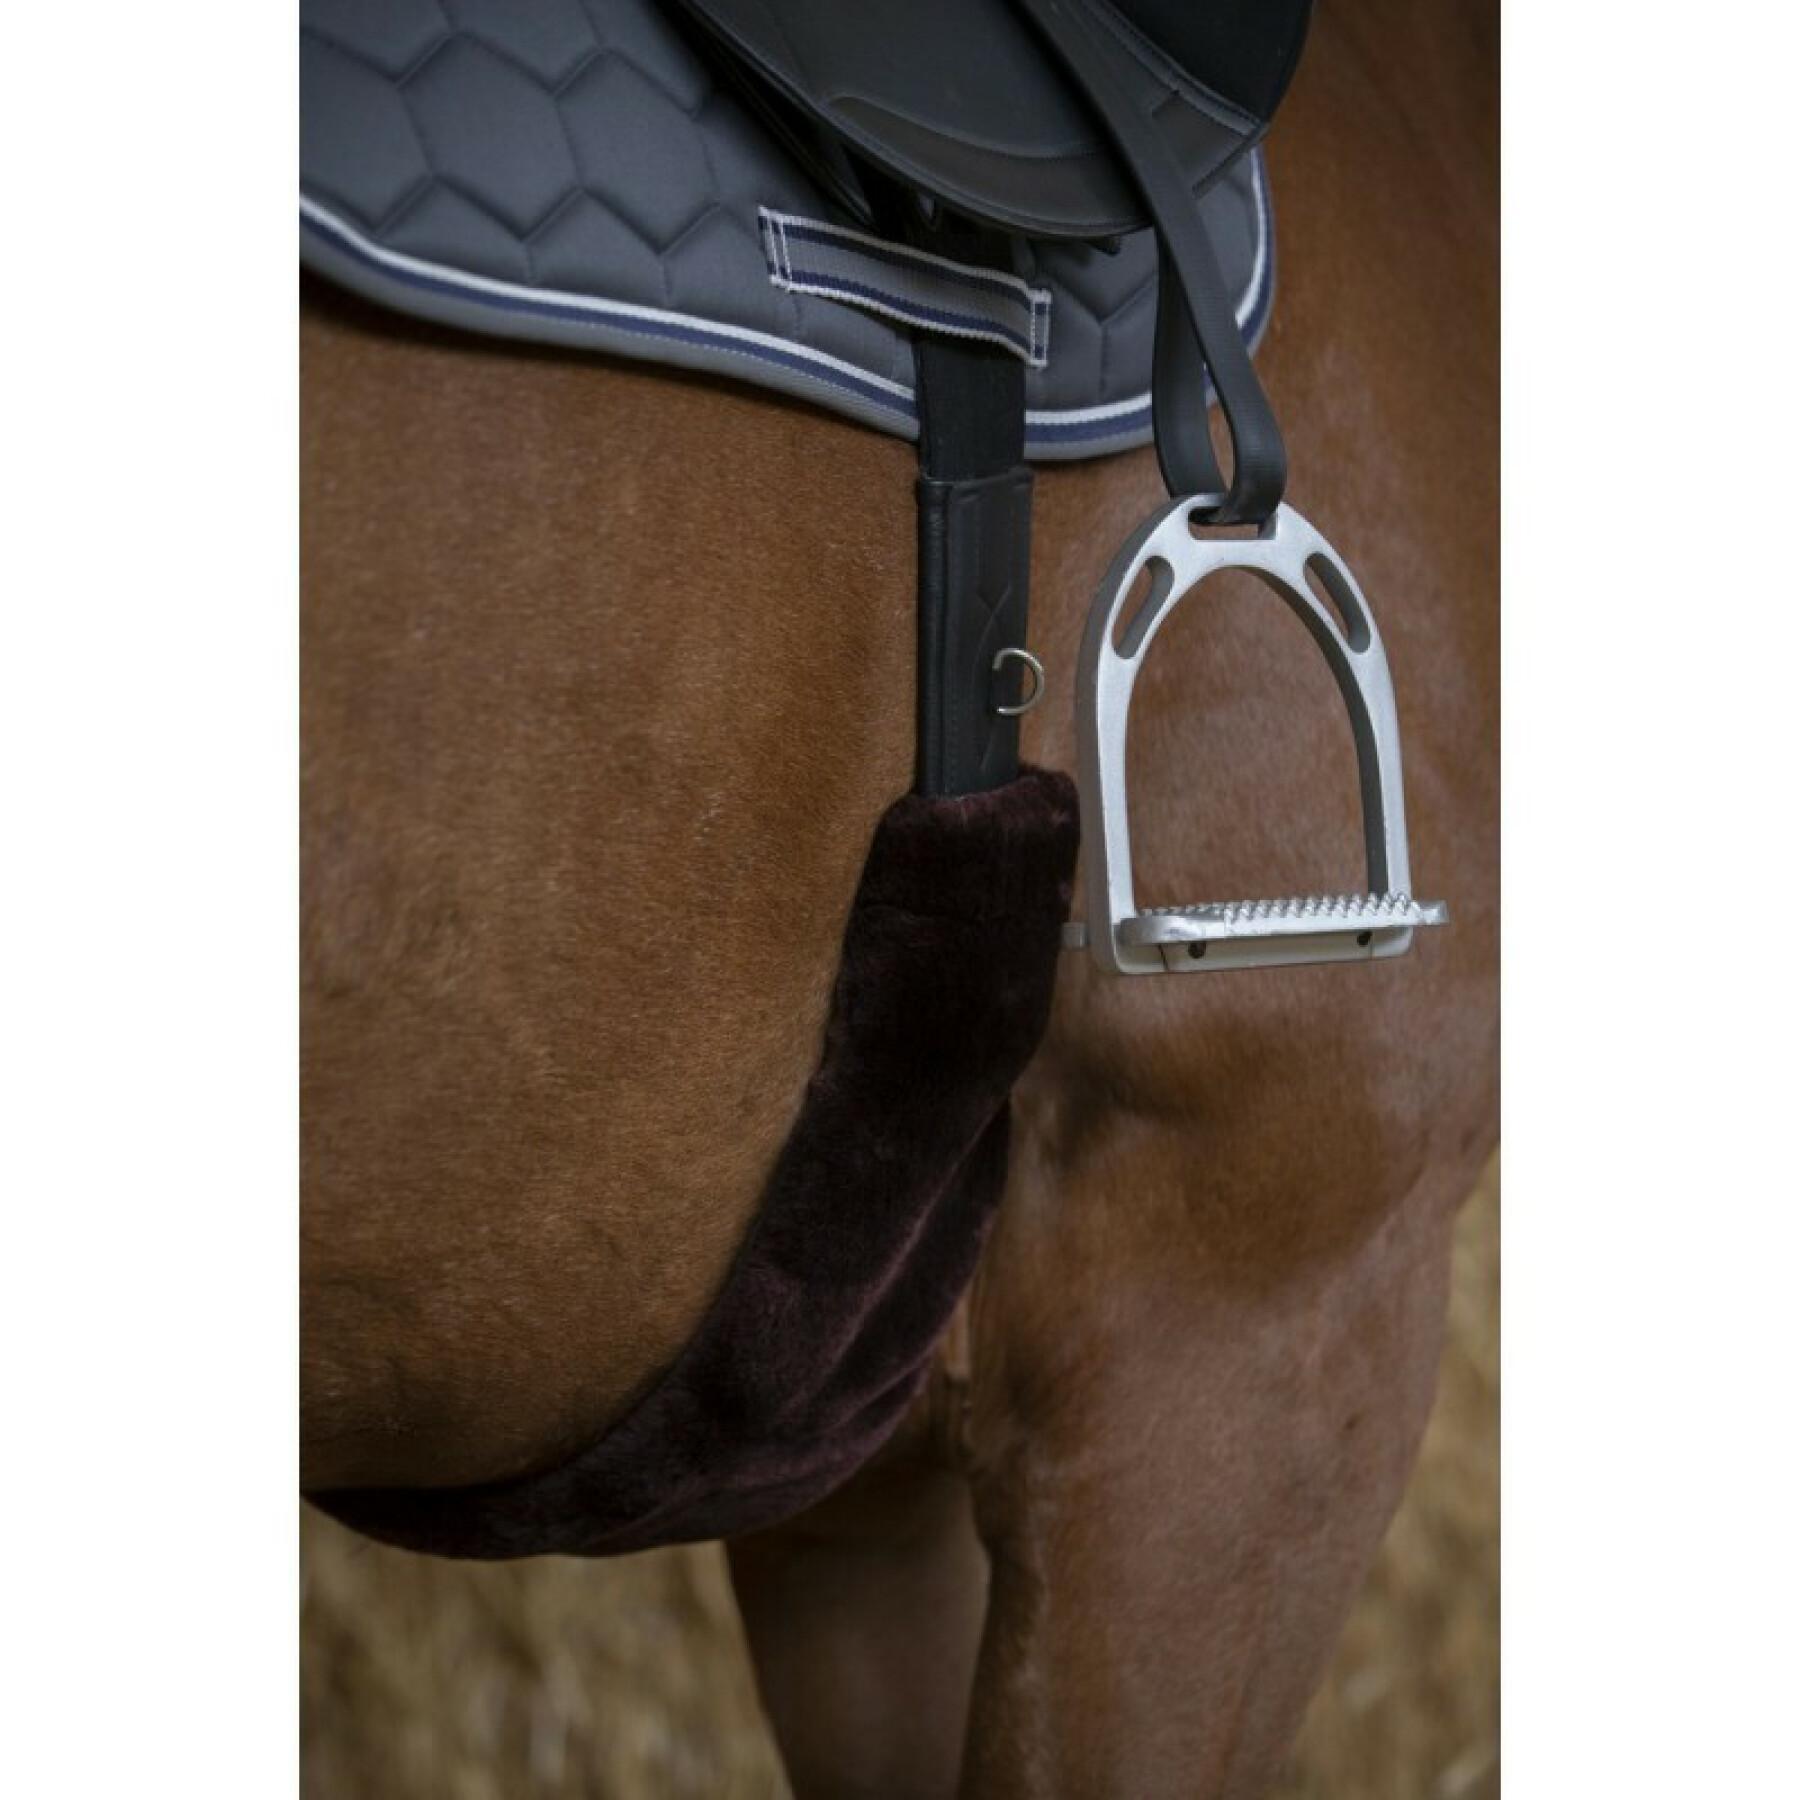 Strap scabbard for horse Equithème Teddy